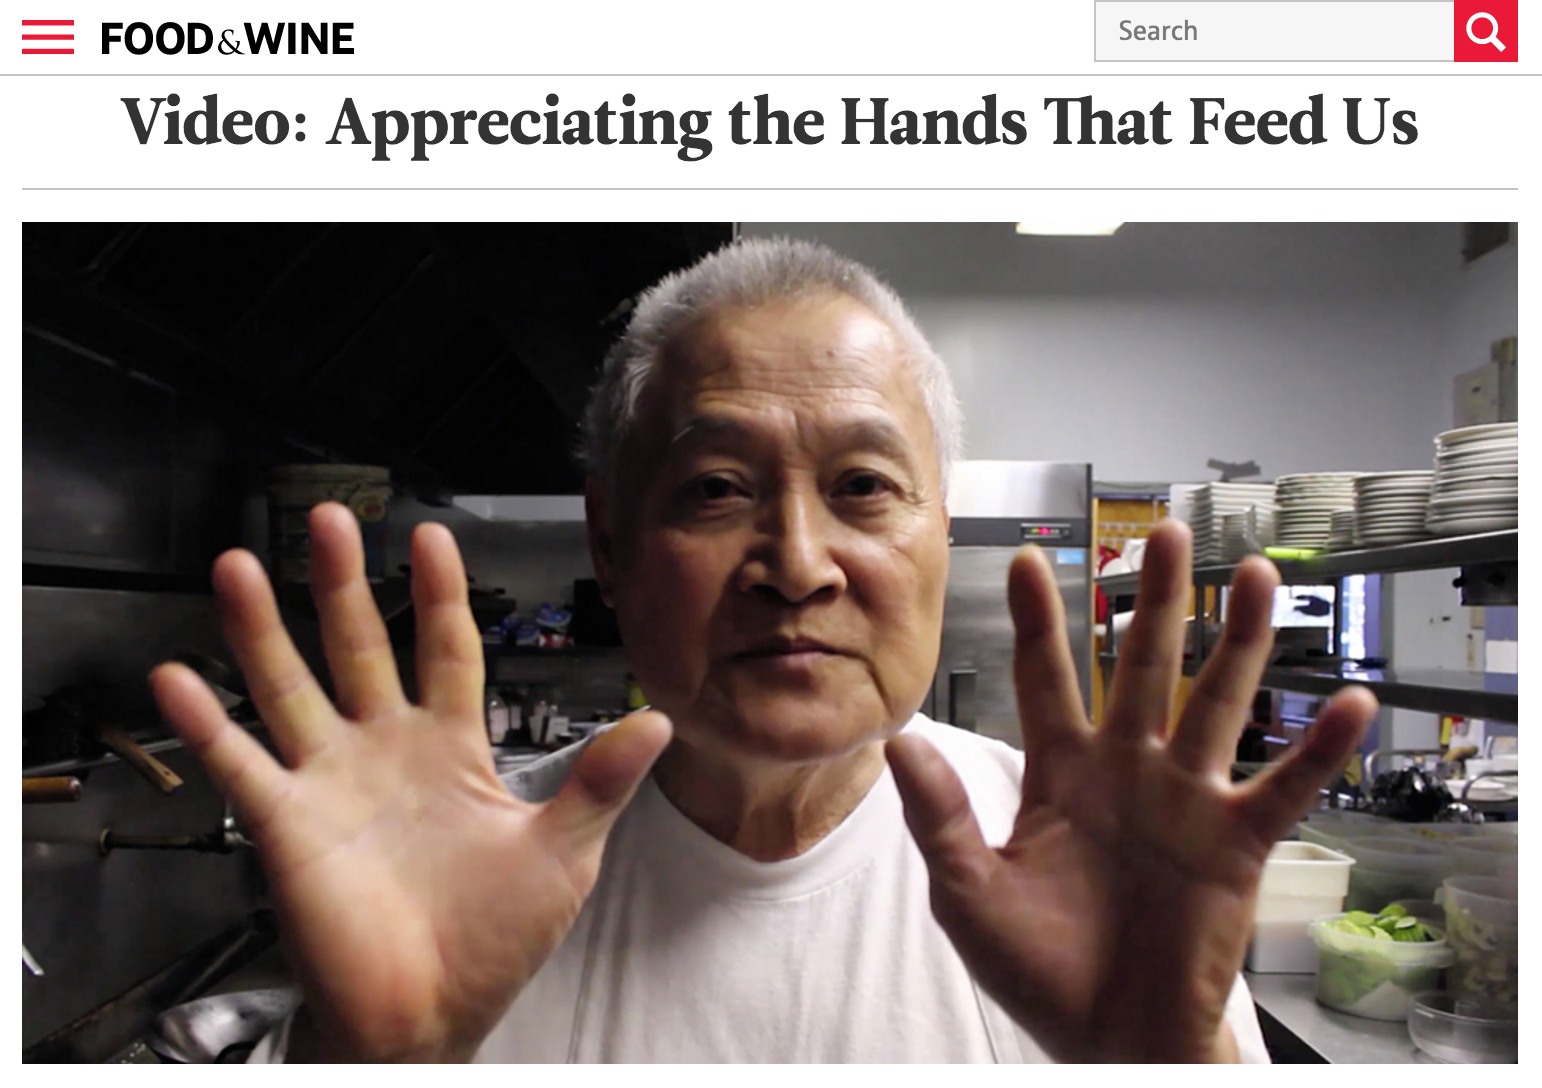 Food & Wine: Appreciating the Hands that Feed Us